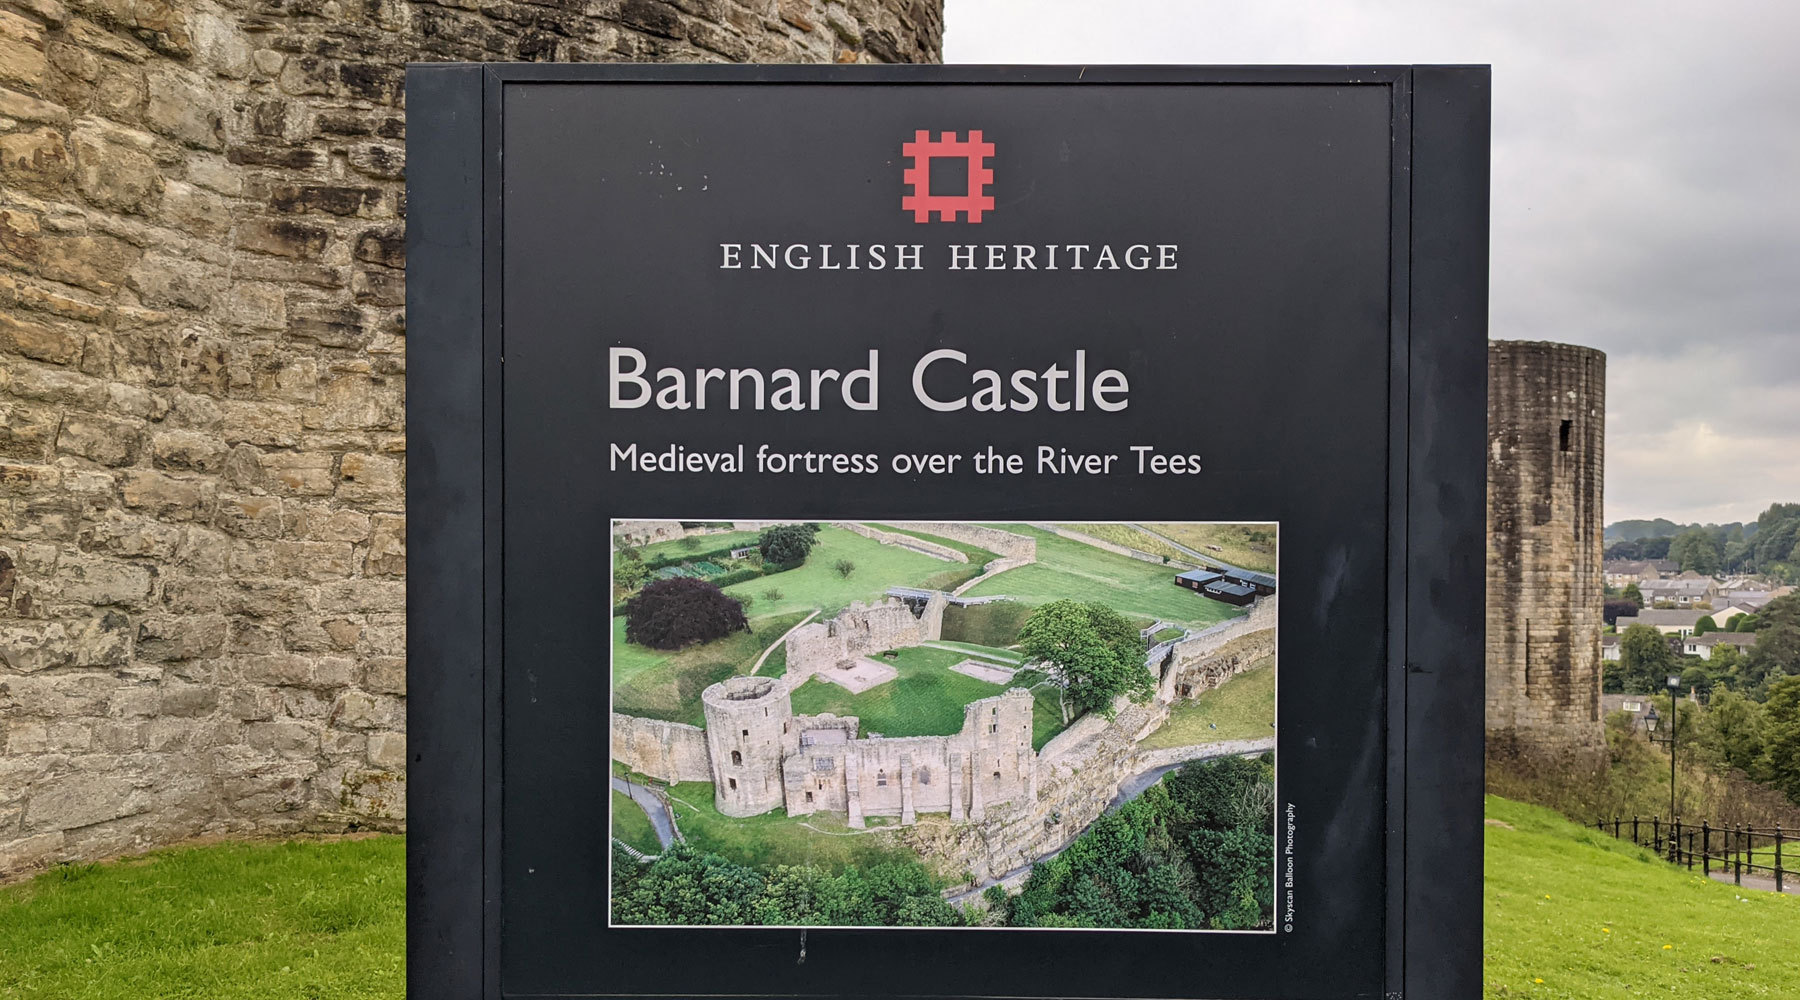 A day trip to - Barnard Castle